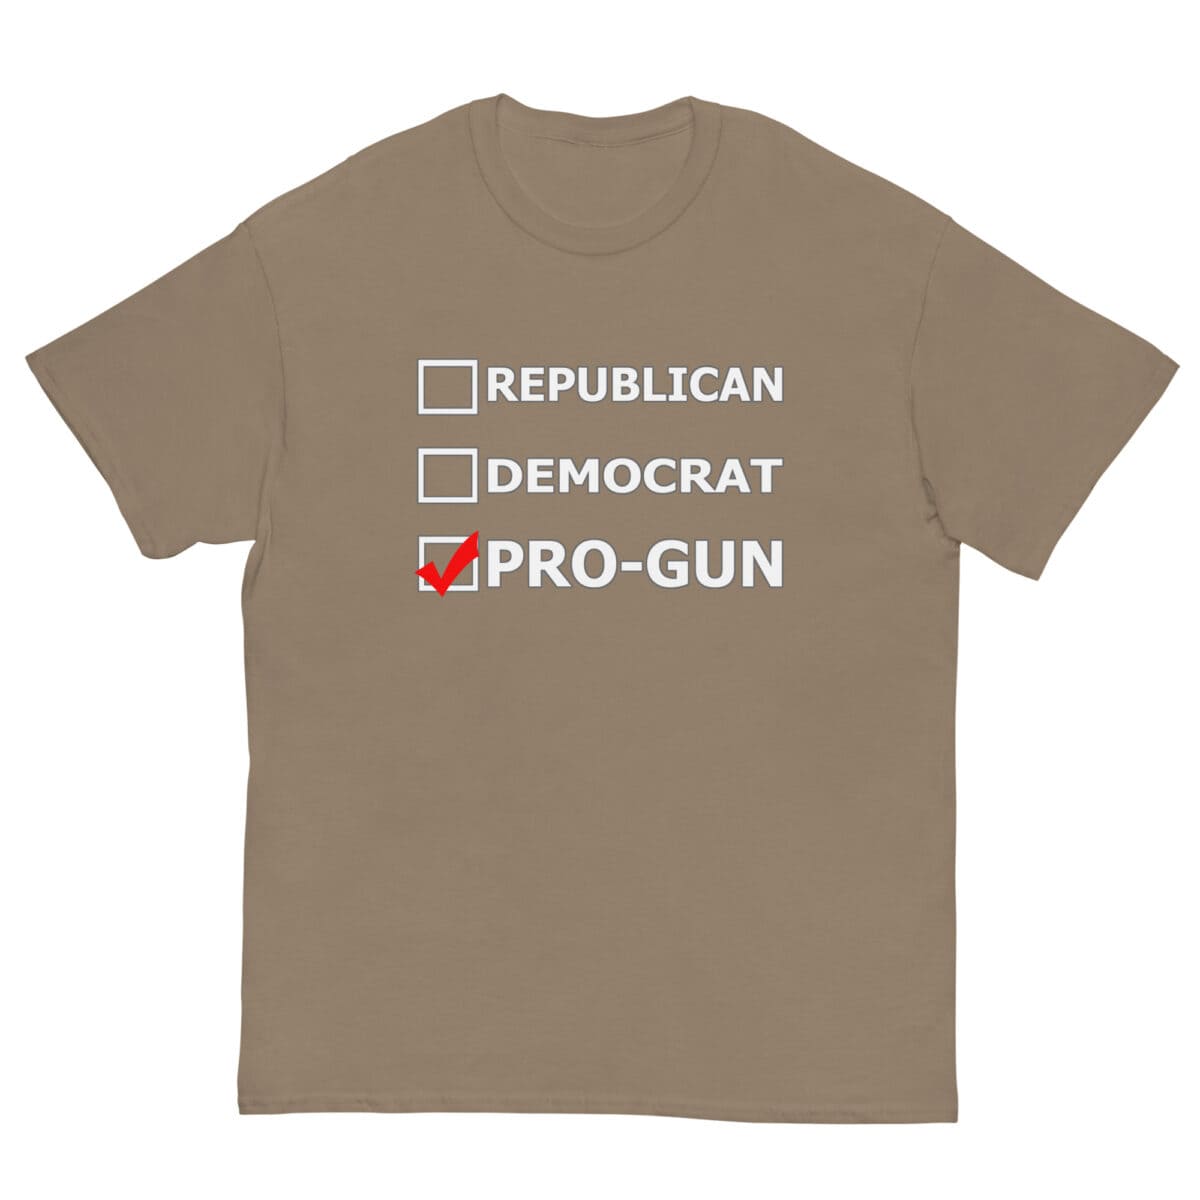 Polls – What specifically does it mean to be “pro-gun”?